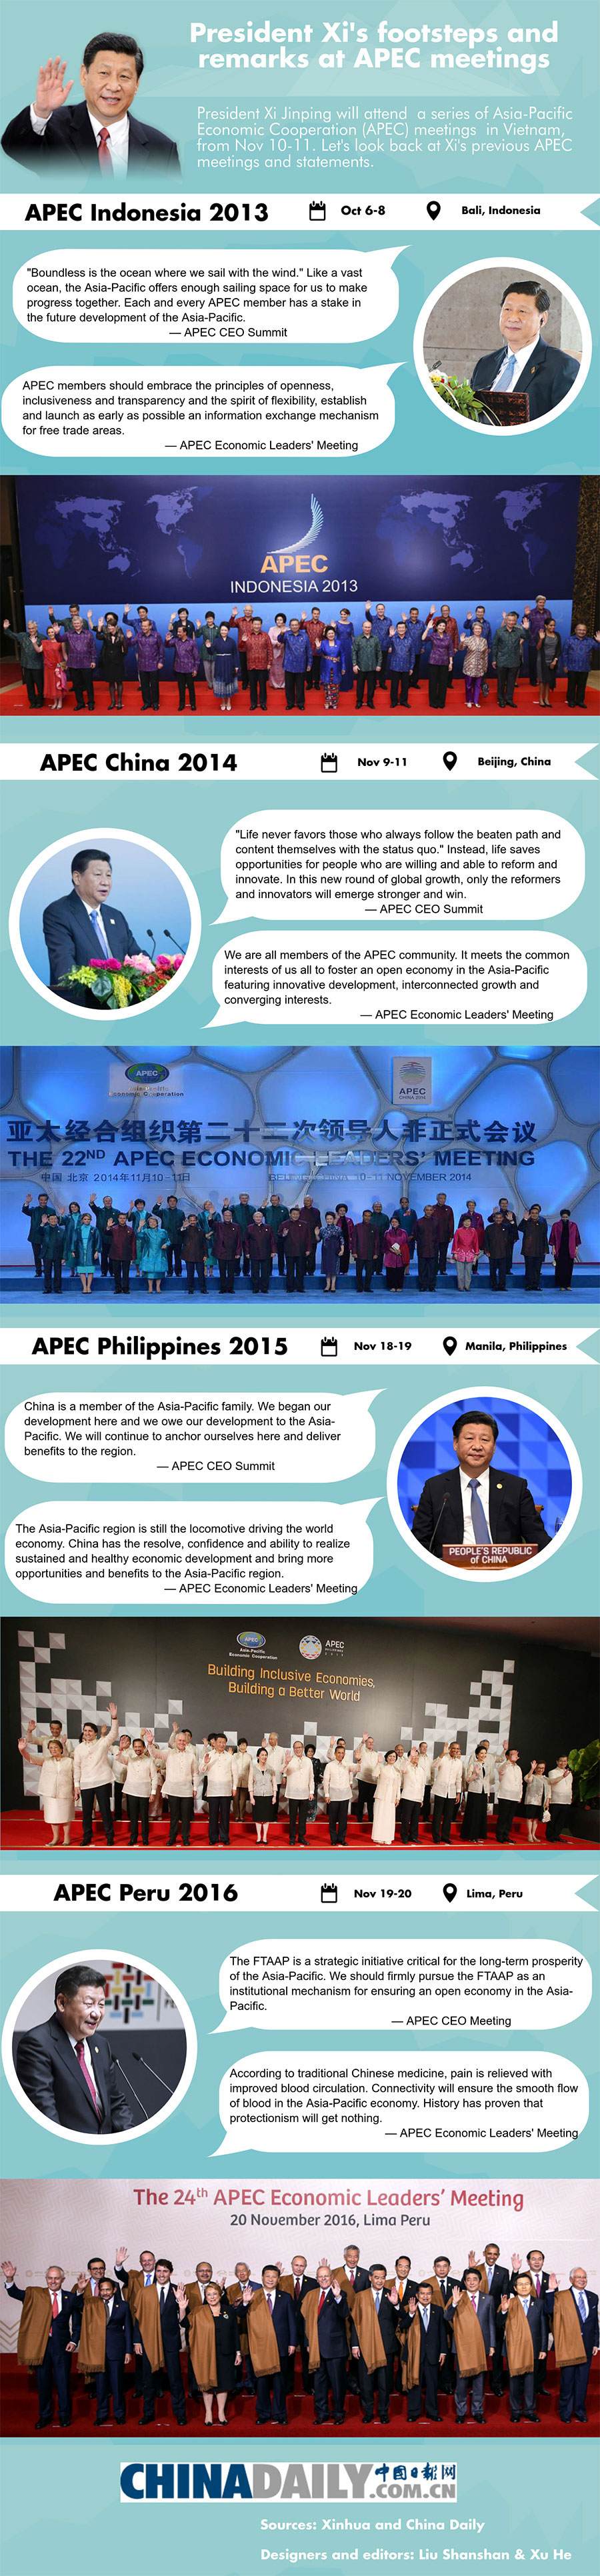 President Xi's footsteps and remarks at APEC meetings